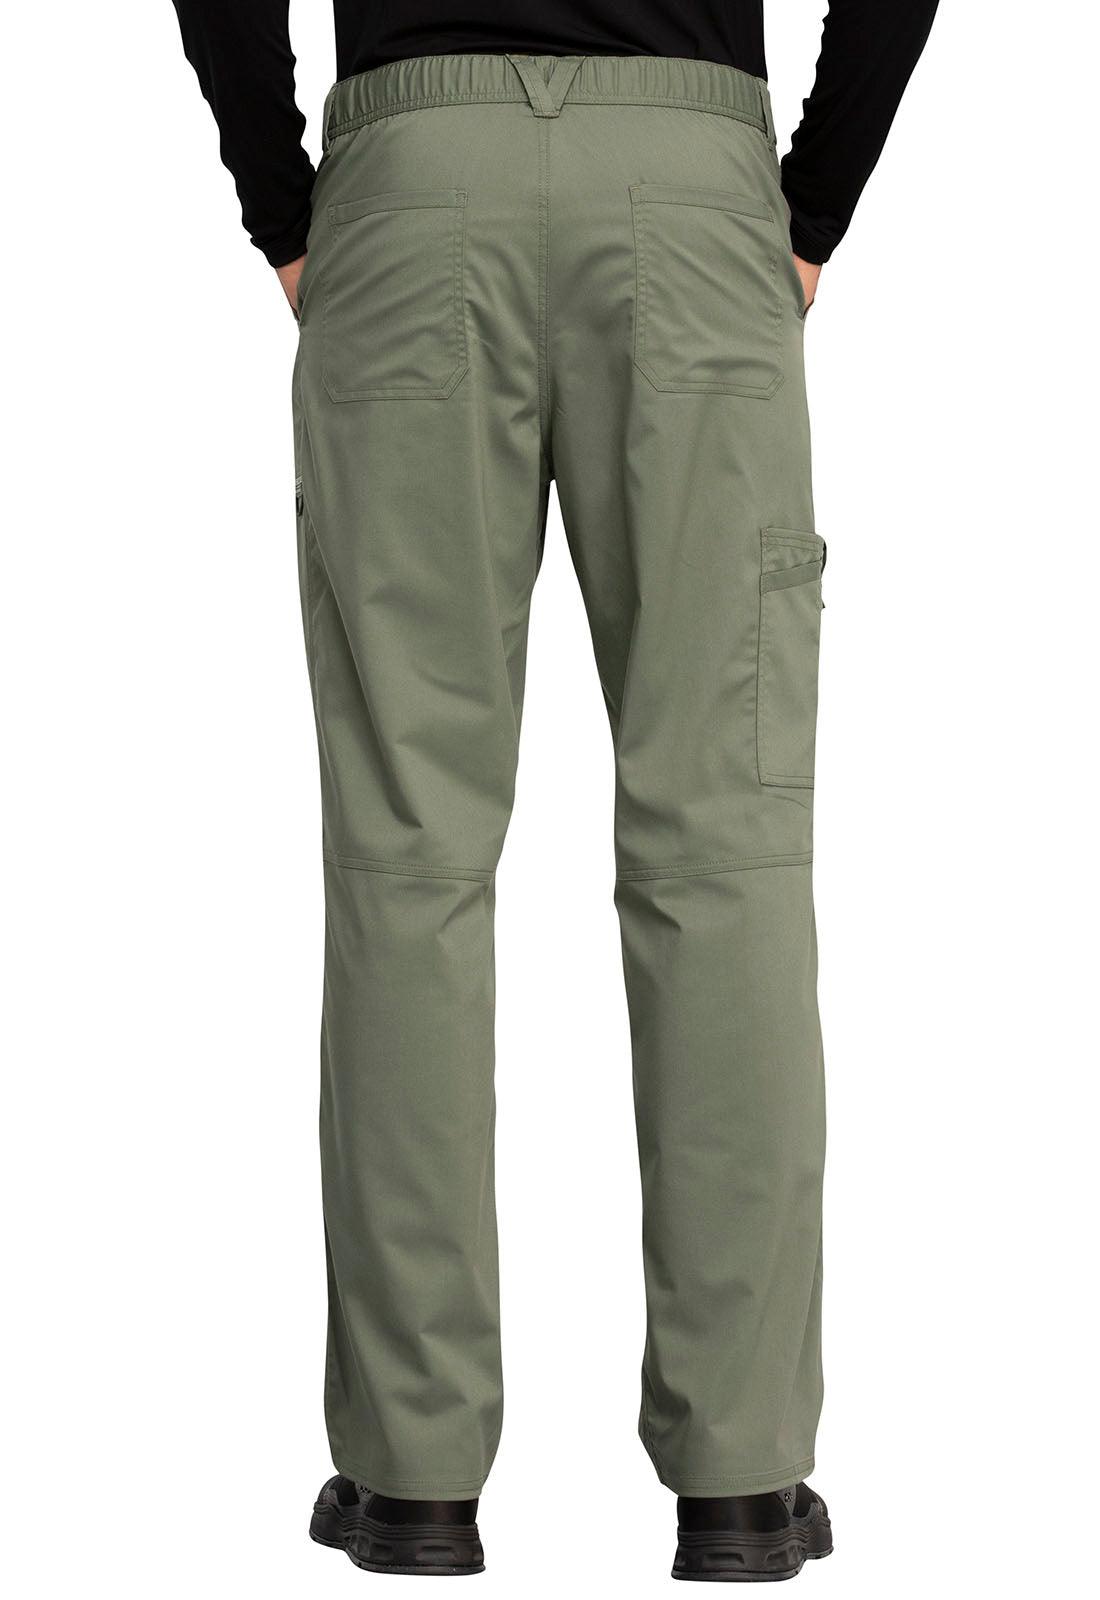 WW Revolution Mens Fly Front Pant WW140 - 21Bmedical